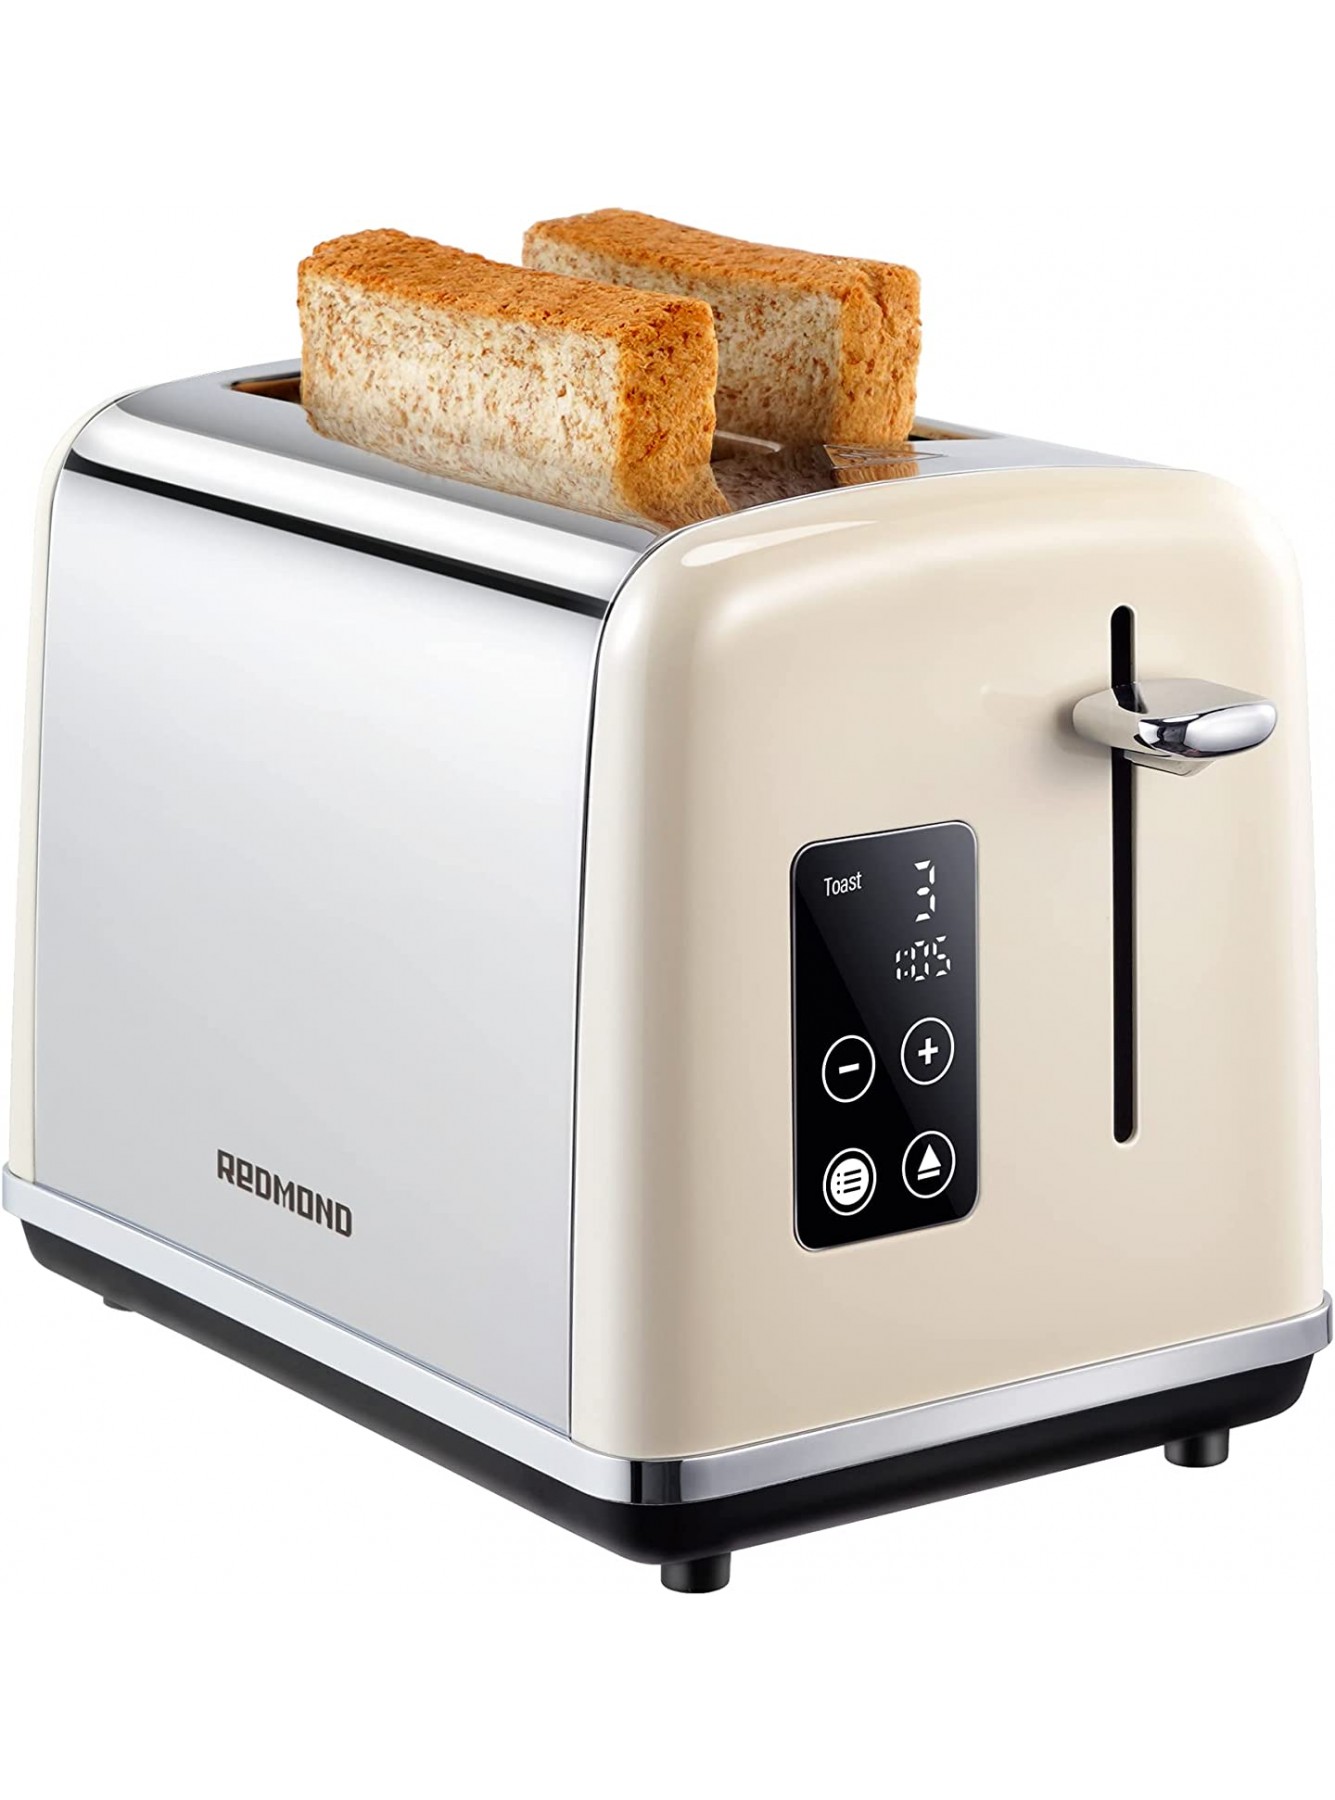 Toaster 2 Slice REDMOND Retro Toaster with Smart Touch Screen and Digital Countdown Timer Stainless Steel toaster with Extra Wide Slot and Cancel Defrost Reheat Function 6 Shade Settings Cream B095PCZDS6